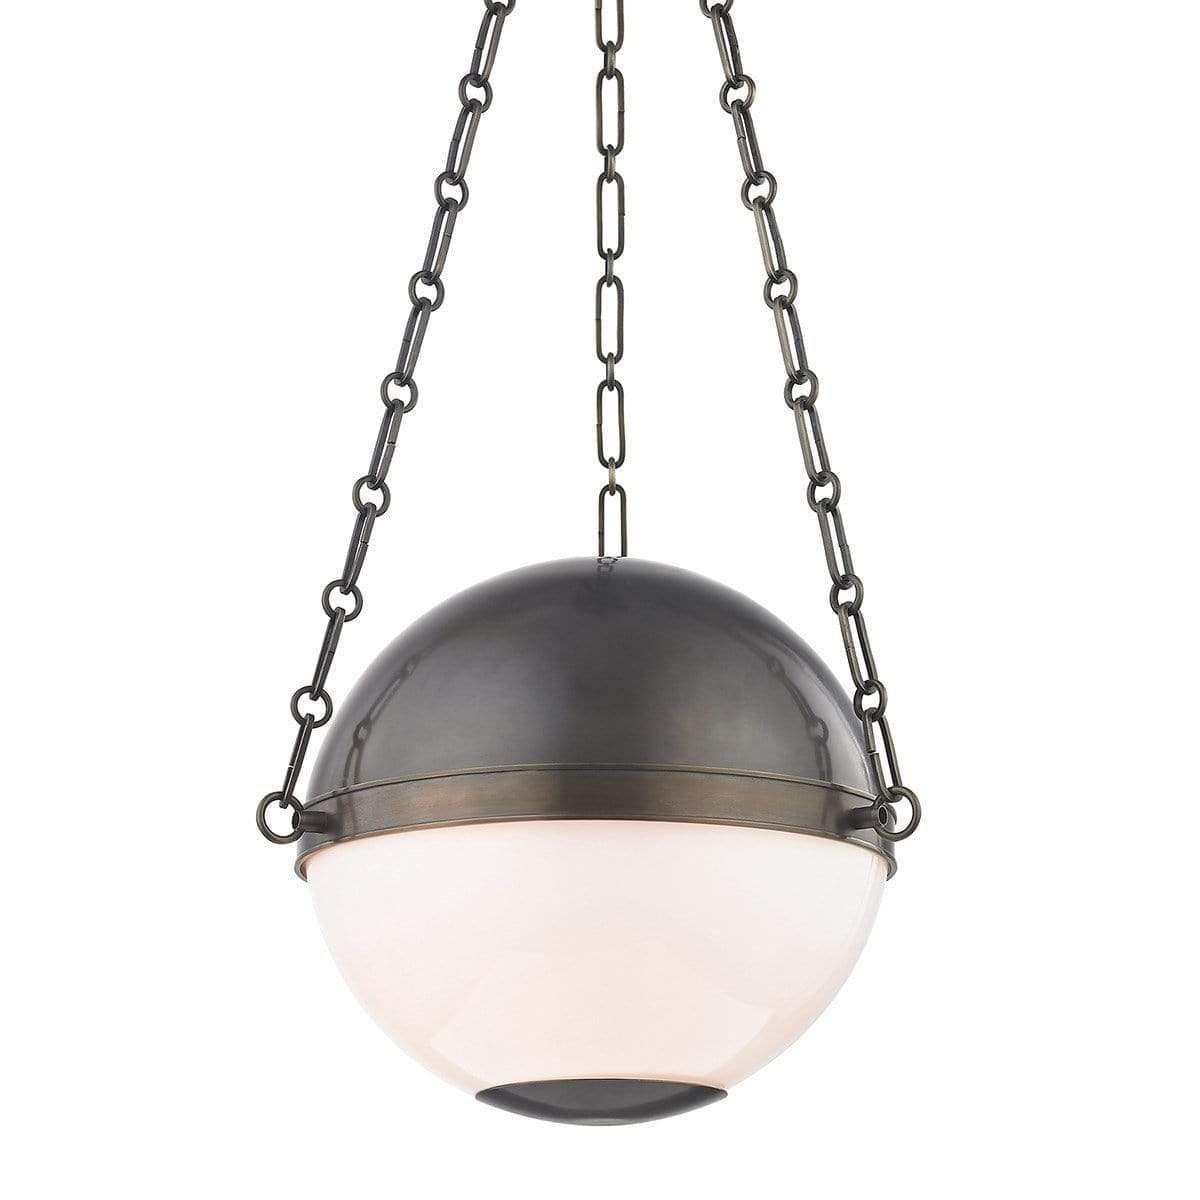 Mark D. Sikes Sphere No. 2 Pendant Lighting hudson-valley-MDS750-DB 806134876845